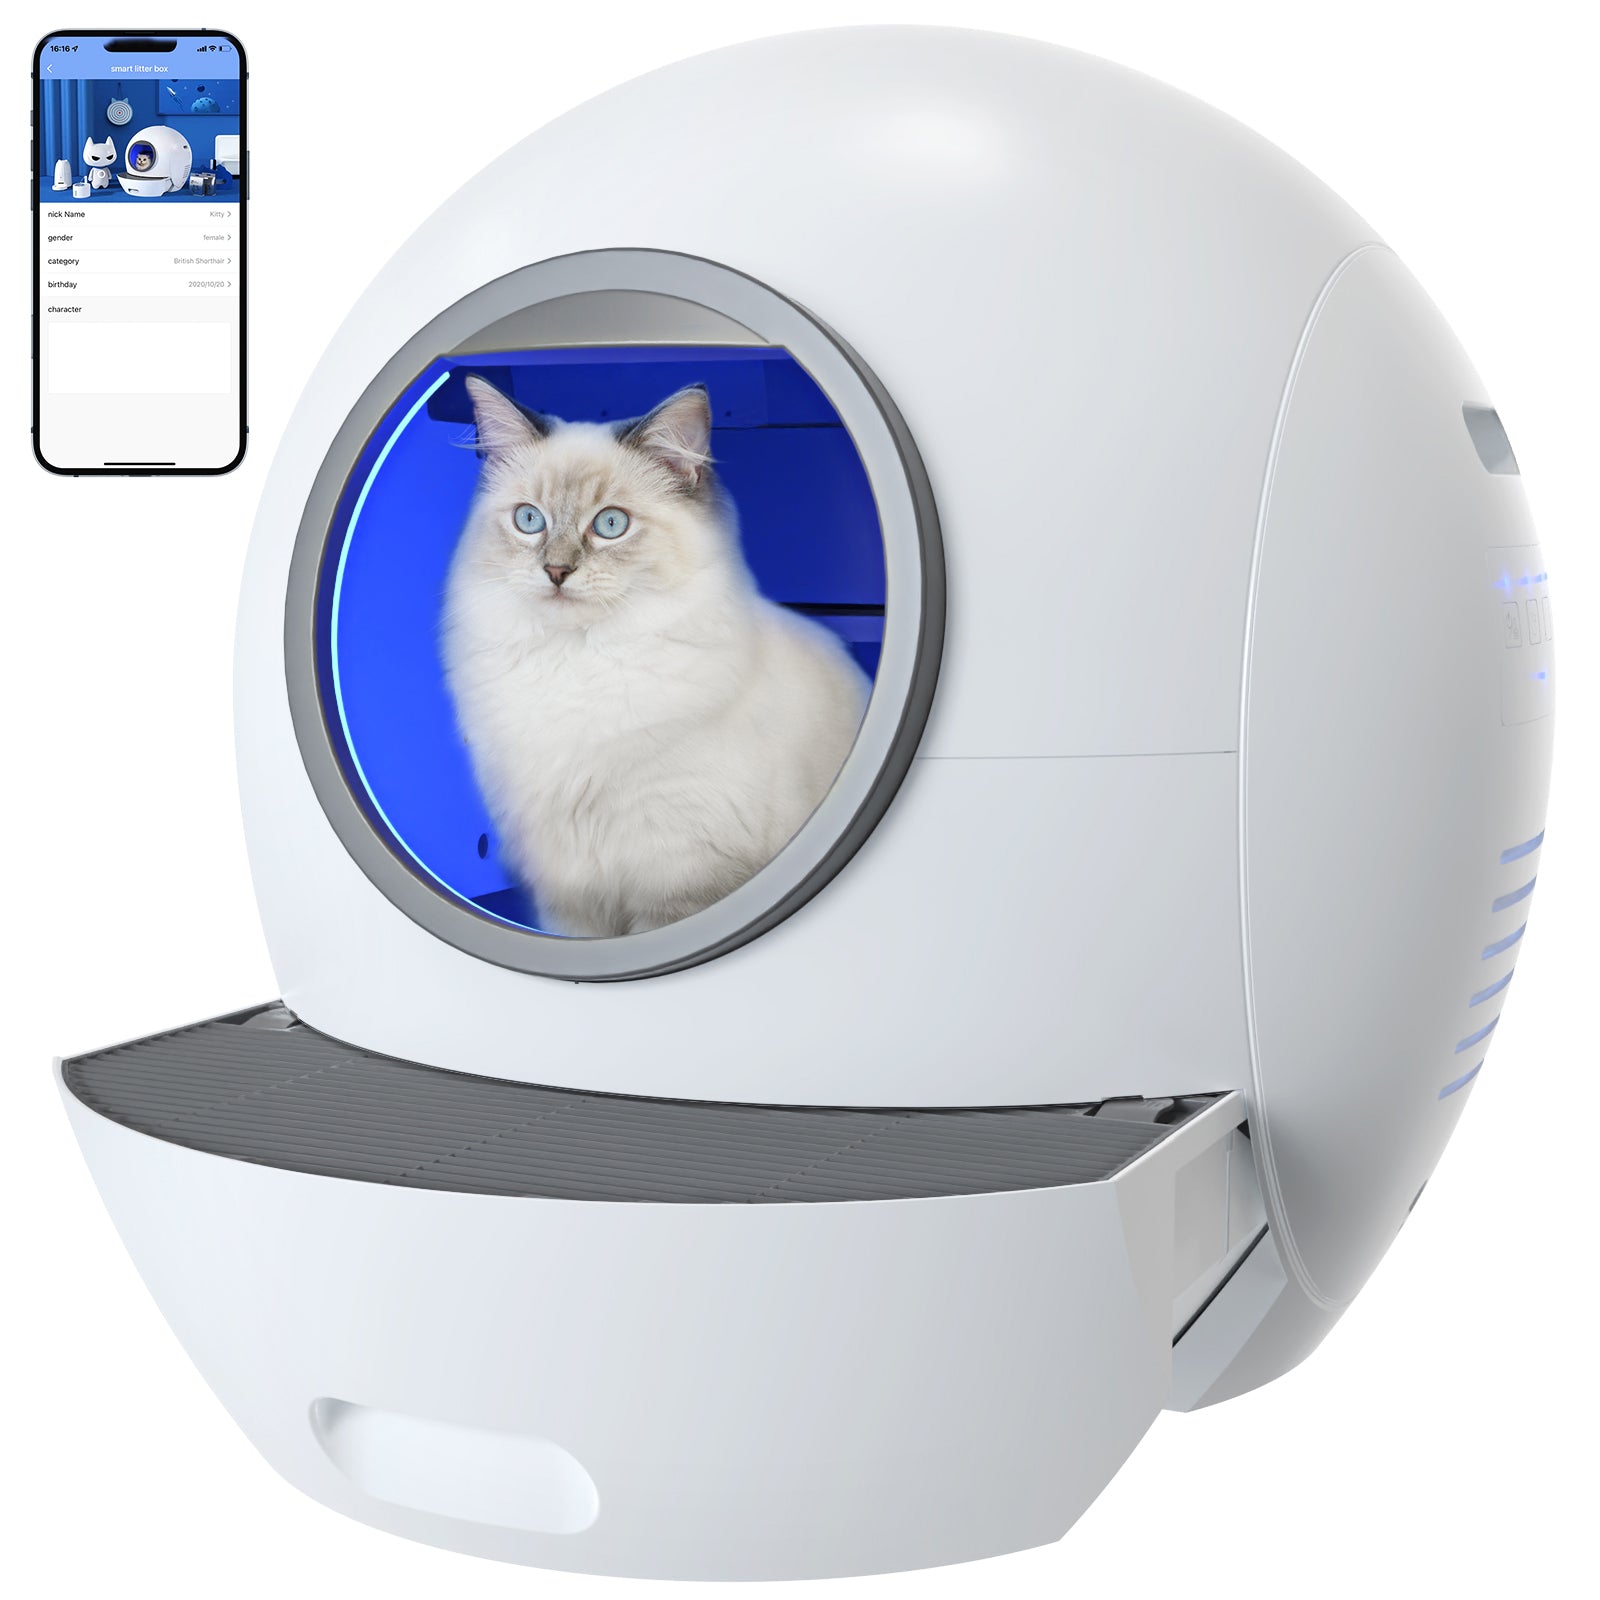 Self-cleaning Cat Litter Box,automatic Litter Box For Multiple Of  Catsone-touch Intelligent Safety Cat Litter Box Easy To Clean.